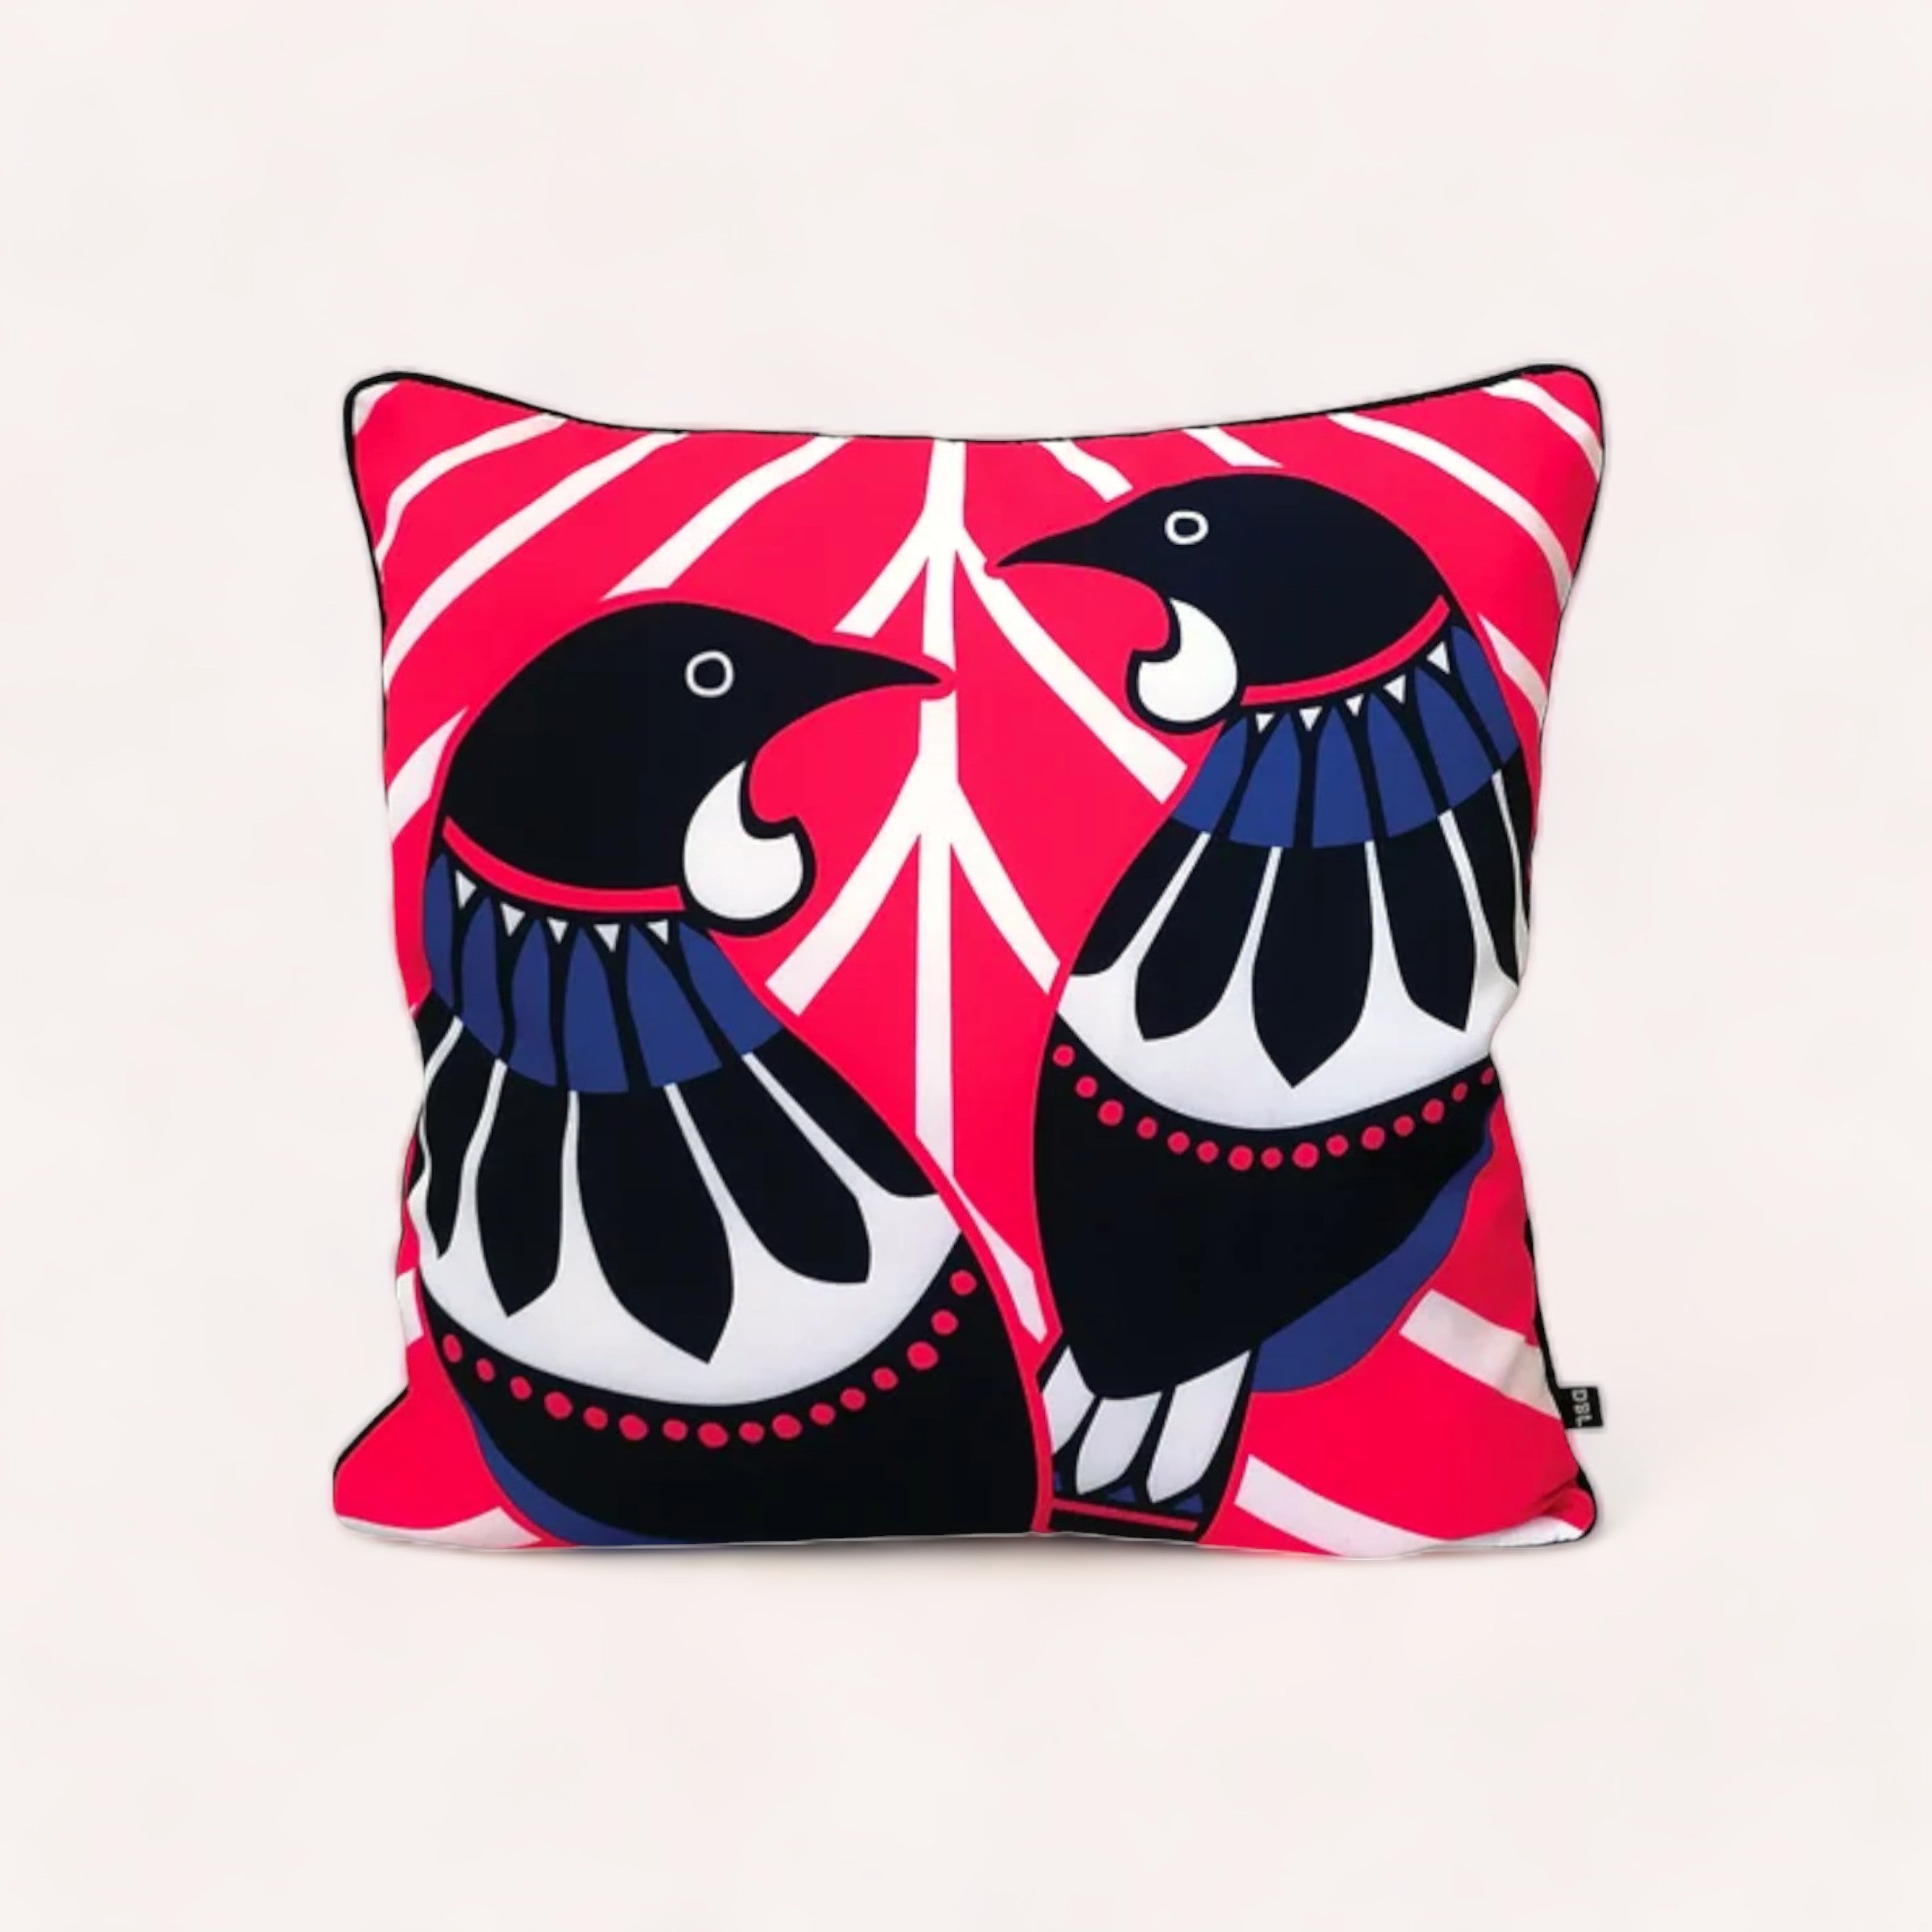 A vibrant Scandi Tui Cushion Cover crafted from canvas, featuring an abstract symmetrical pattern with two stylized NZ bird tui figures in black, white, and red against a pink background, highlighting its origin as a New Design by Leonard.